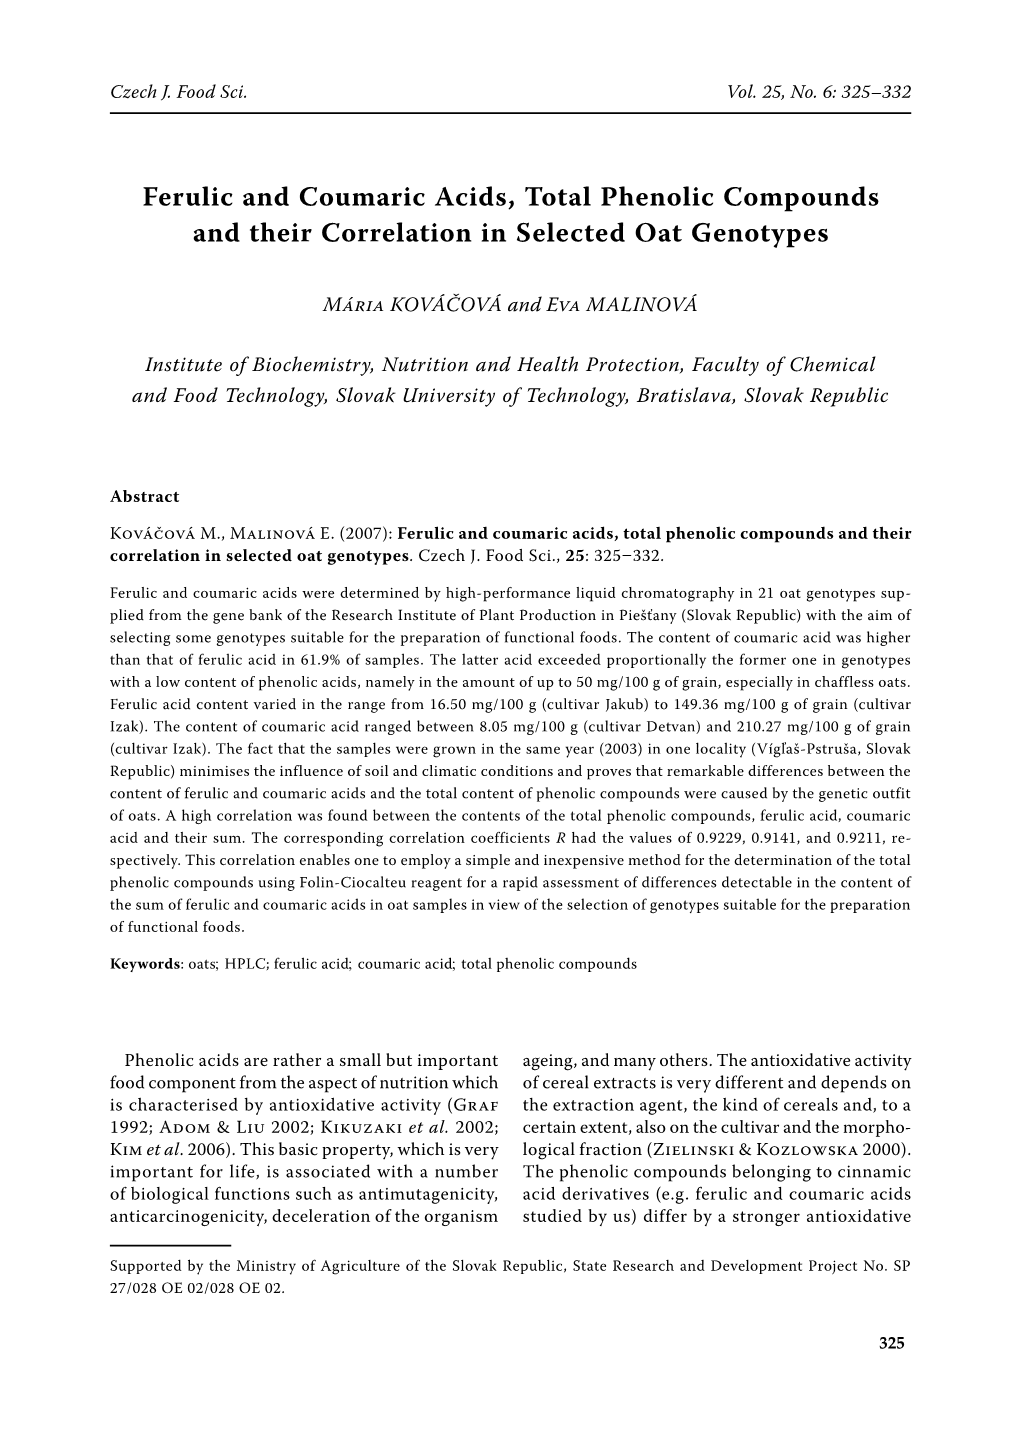 Ferulic and Coumaric Acids, Total Phenolic Compounds and Their Correlation in Selected Oat Genotypes